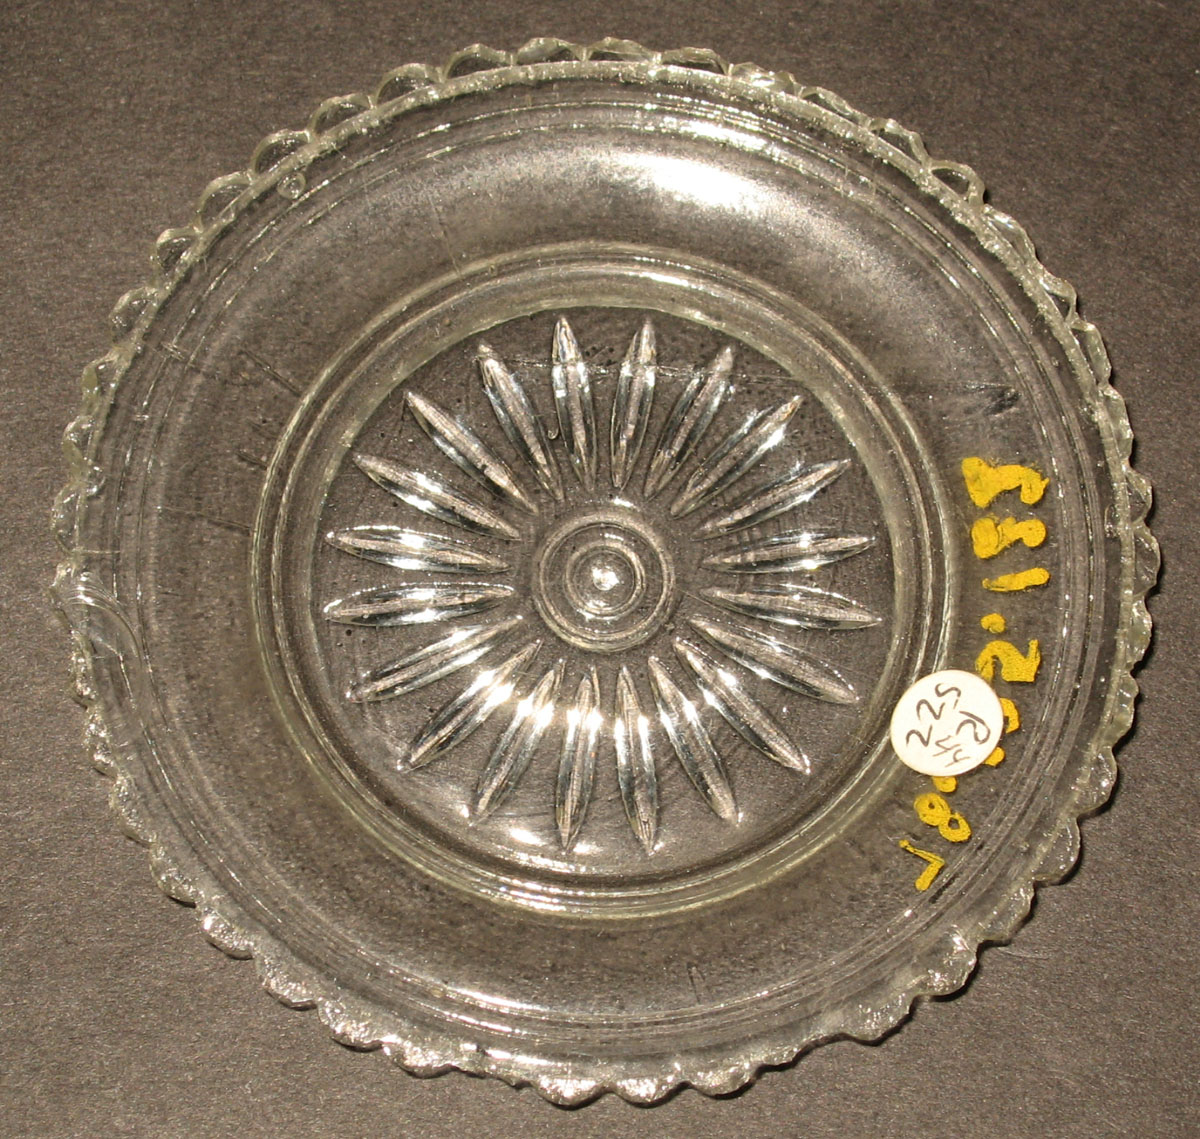 1978.0125.122 Glass cup plate